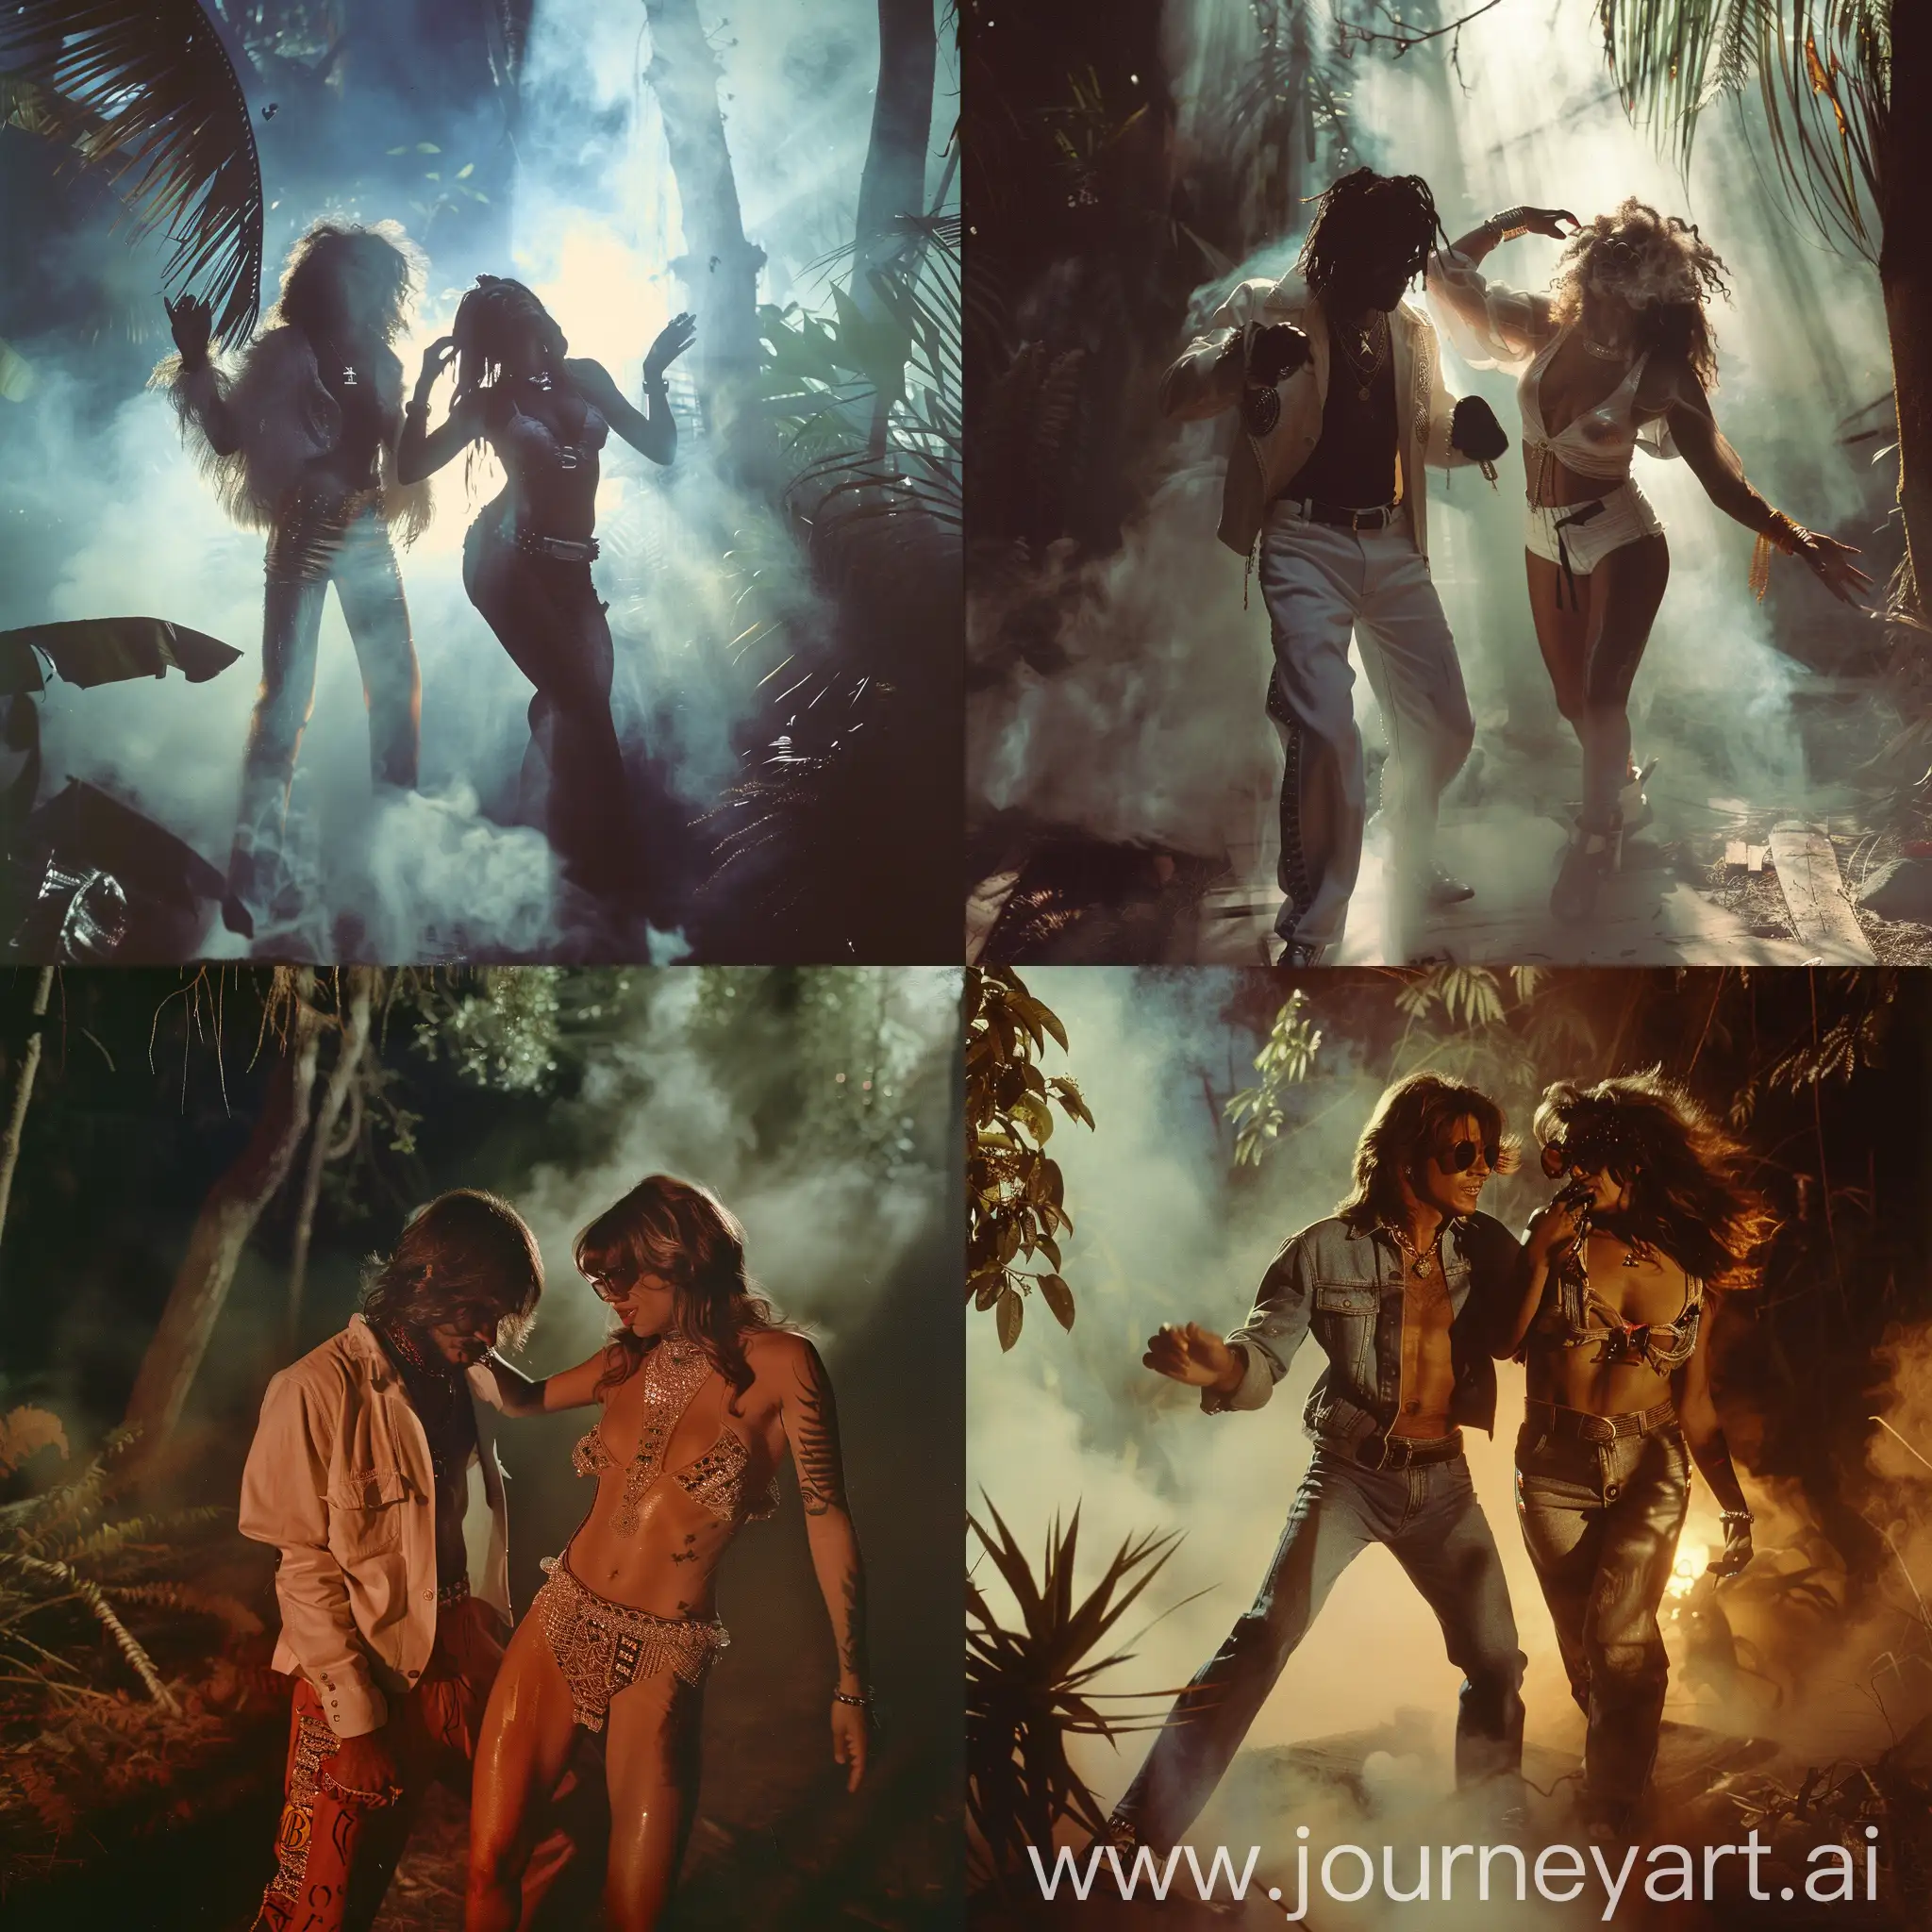 Juice-Wrld-Dancing-with-a-Woman-in-a-Smokey-Forest-1980s-Photograph